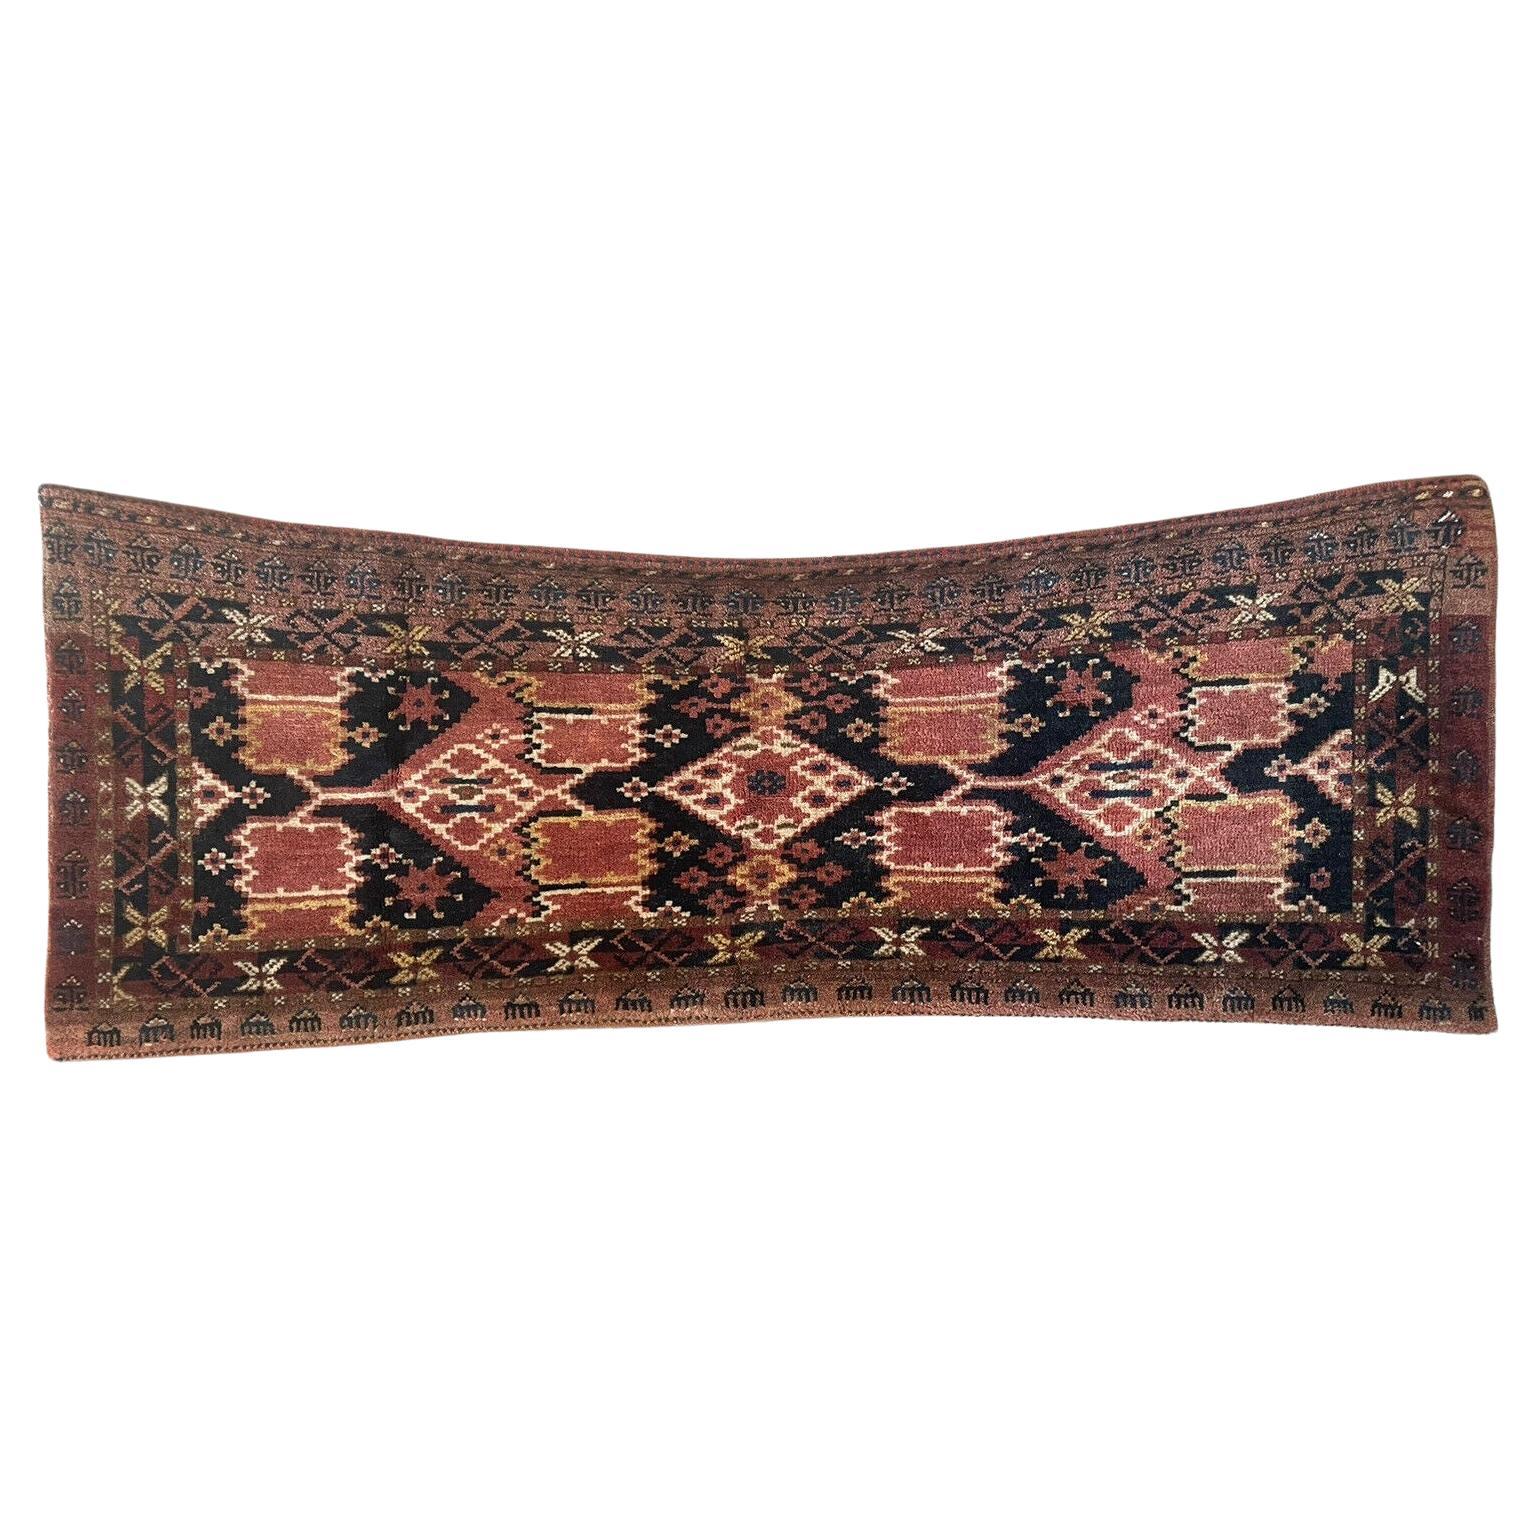 Handmade Antique Afghan Beshir Collectible Chuval Rug 1.5' x 4.8', 1900s - 1N11 For Sale